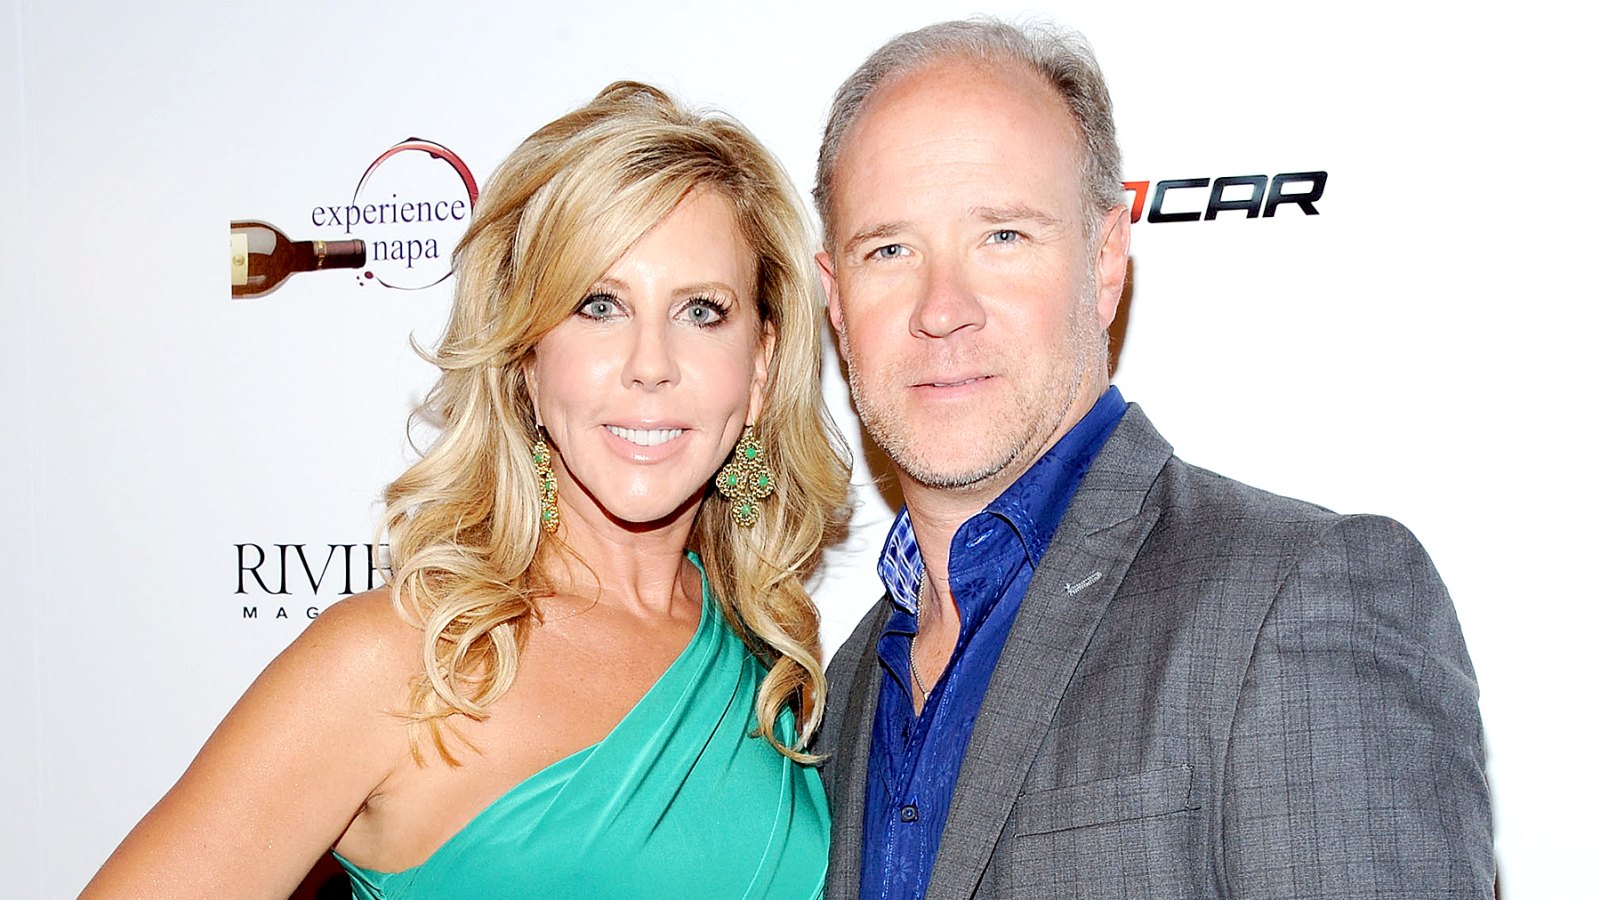 Vicki Gunvalson and Brooks Ayers arrive at the Wines By Wives Launch Party For Celebrity Wine Of The Month Club at Lexington Social House on May 8, 2012 in Hollywood, California.